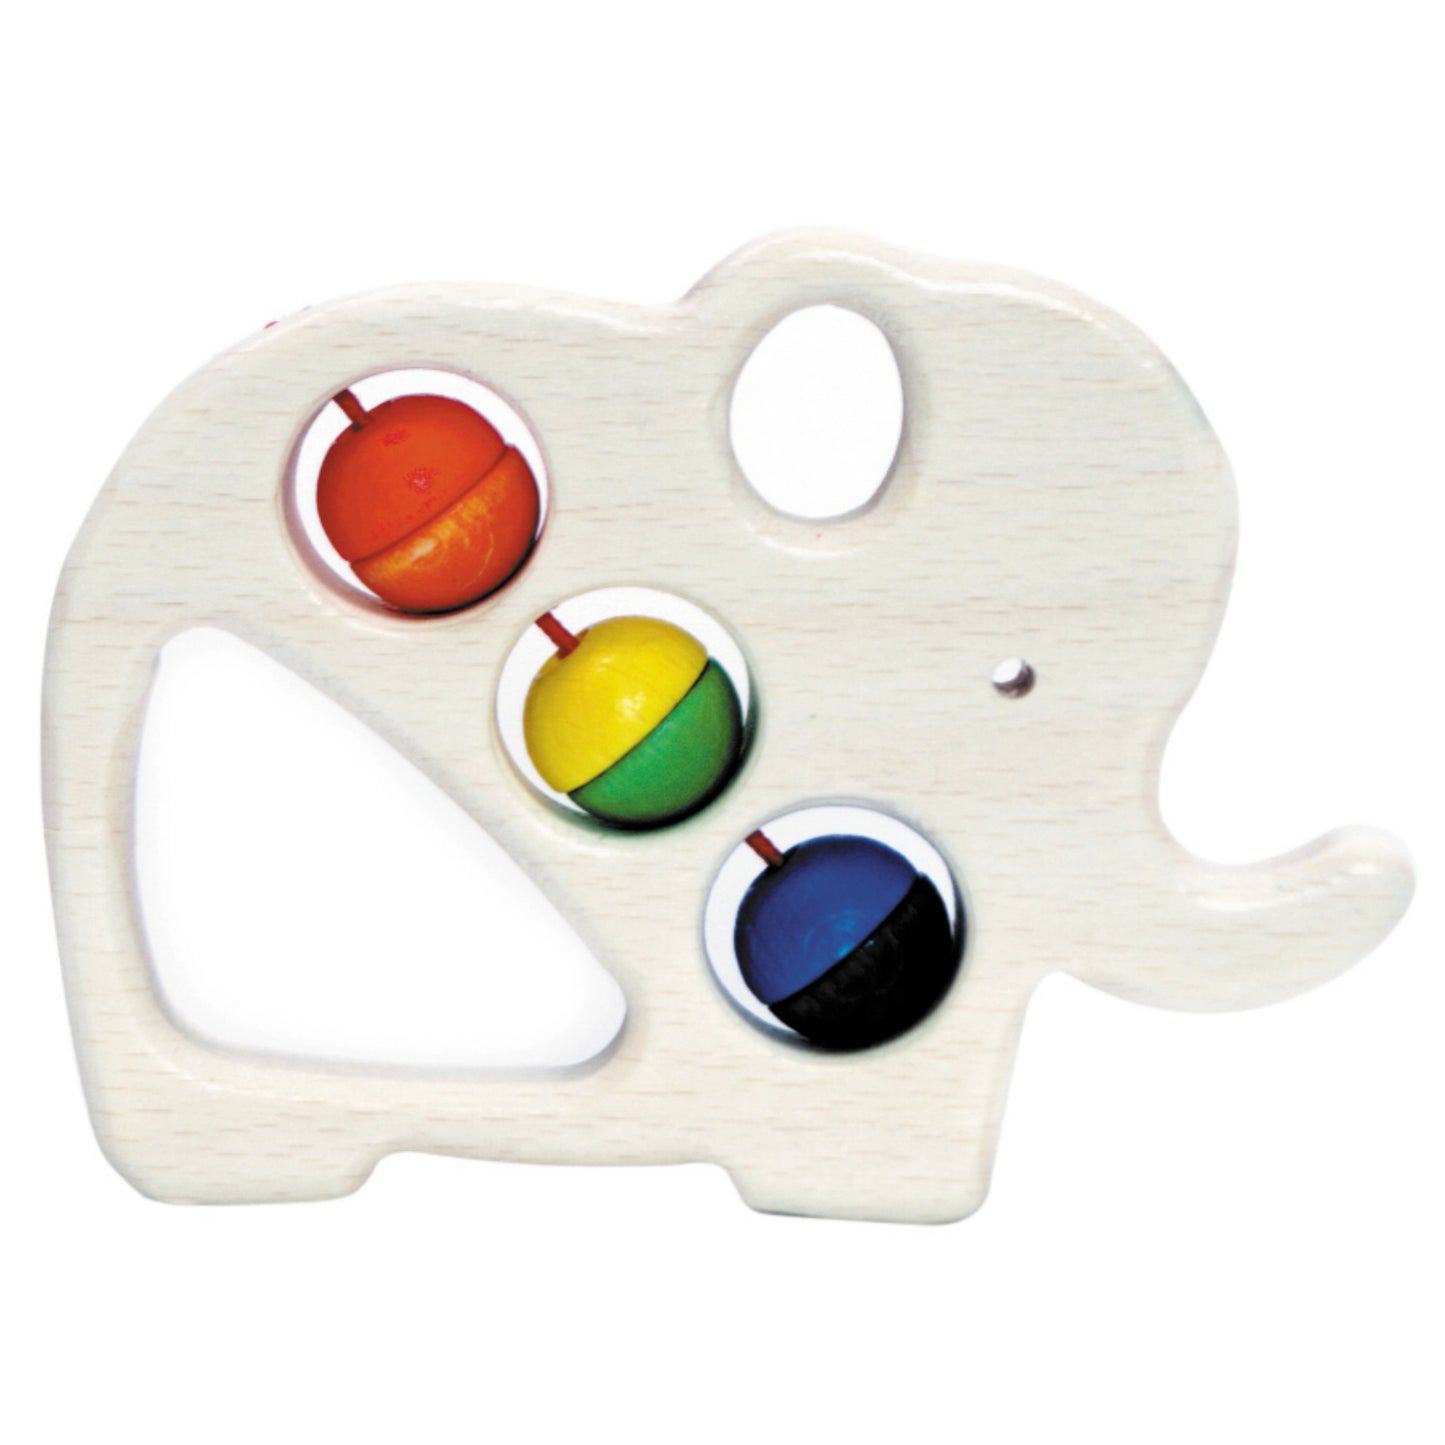 Elephant | Rattle & Clutching Toy | Baby’s First Wooden Toy